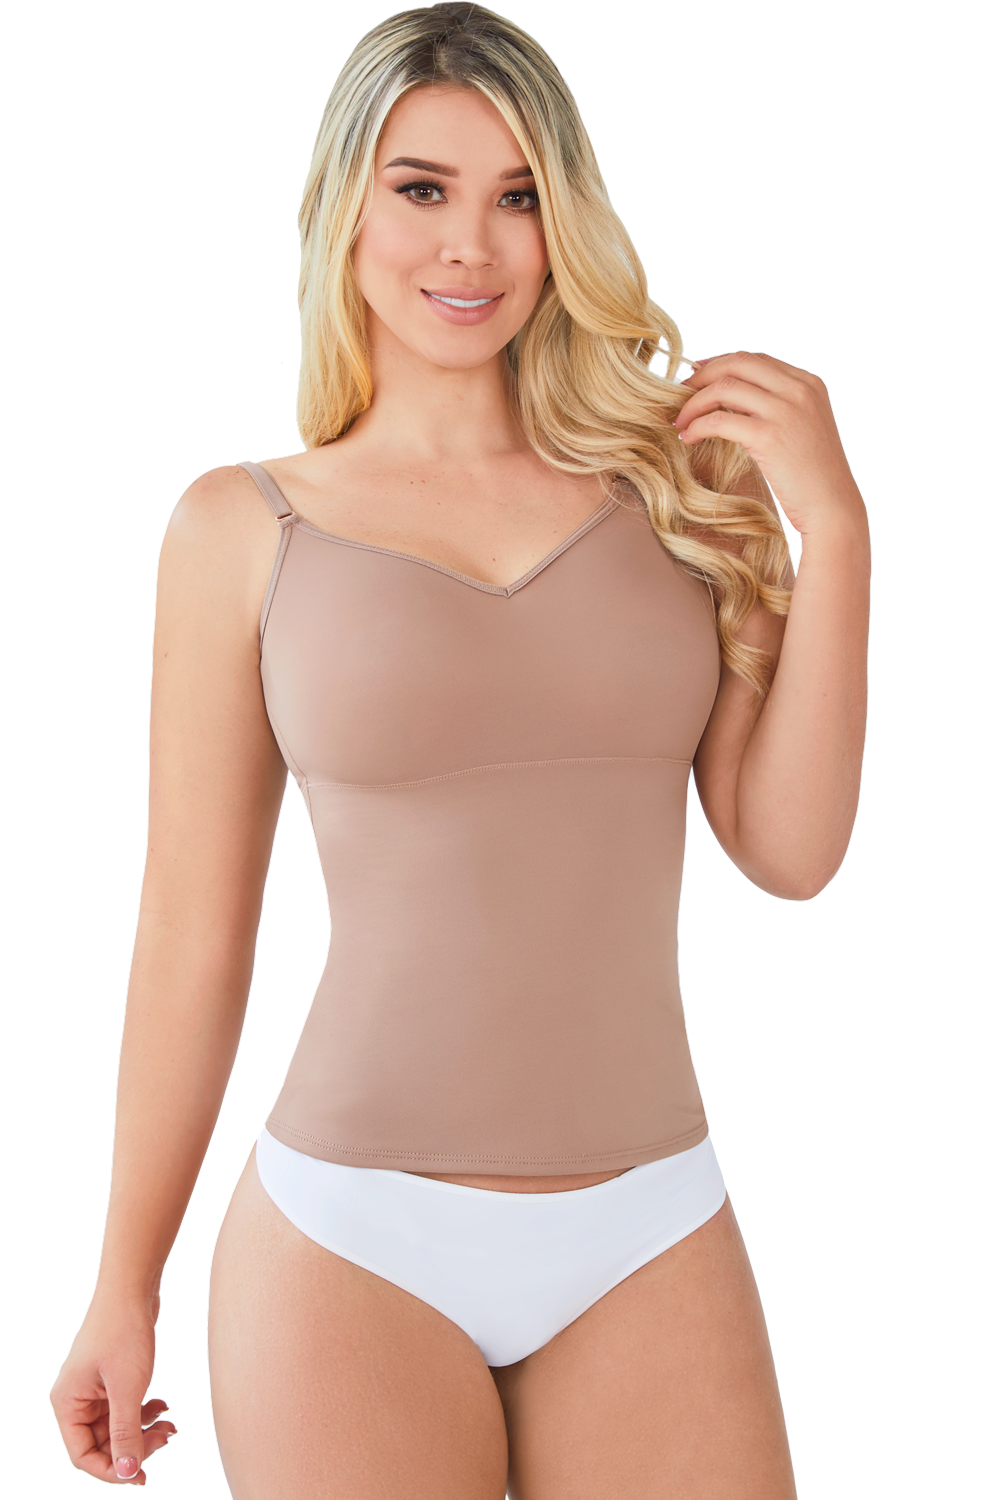 Jackie London Body Shaper W/ Covered Back - JL2010 - Made In